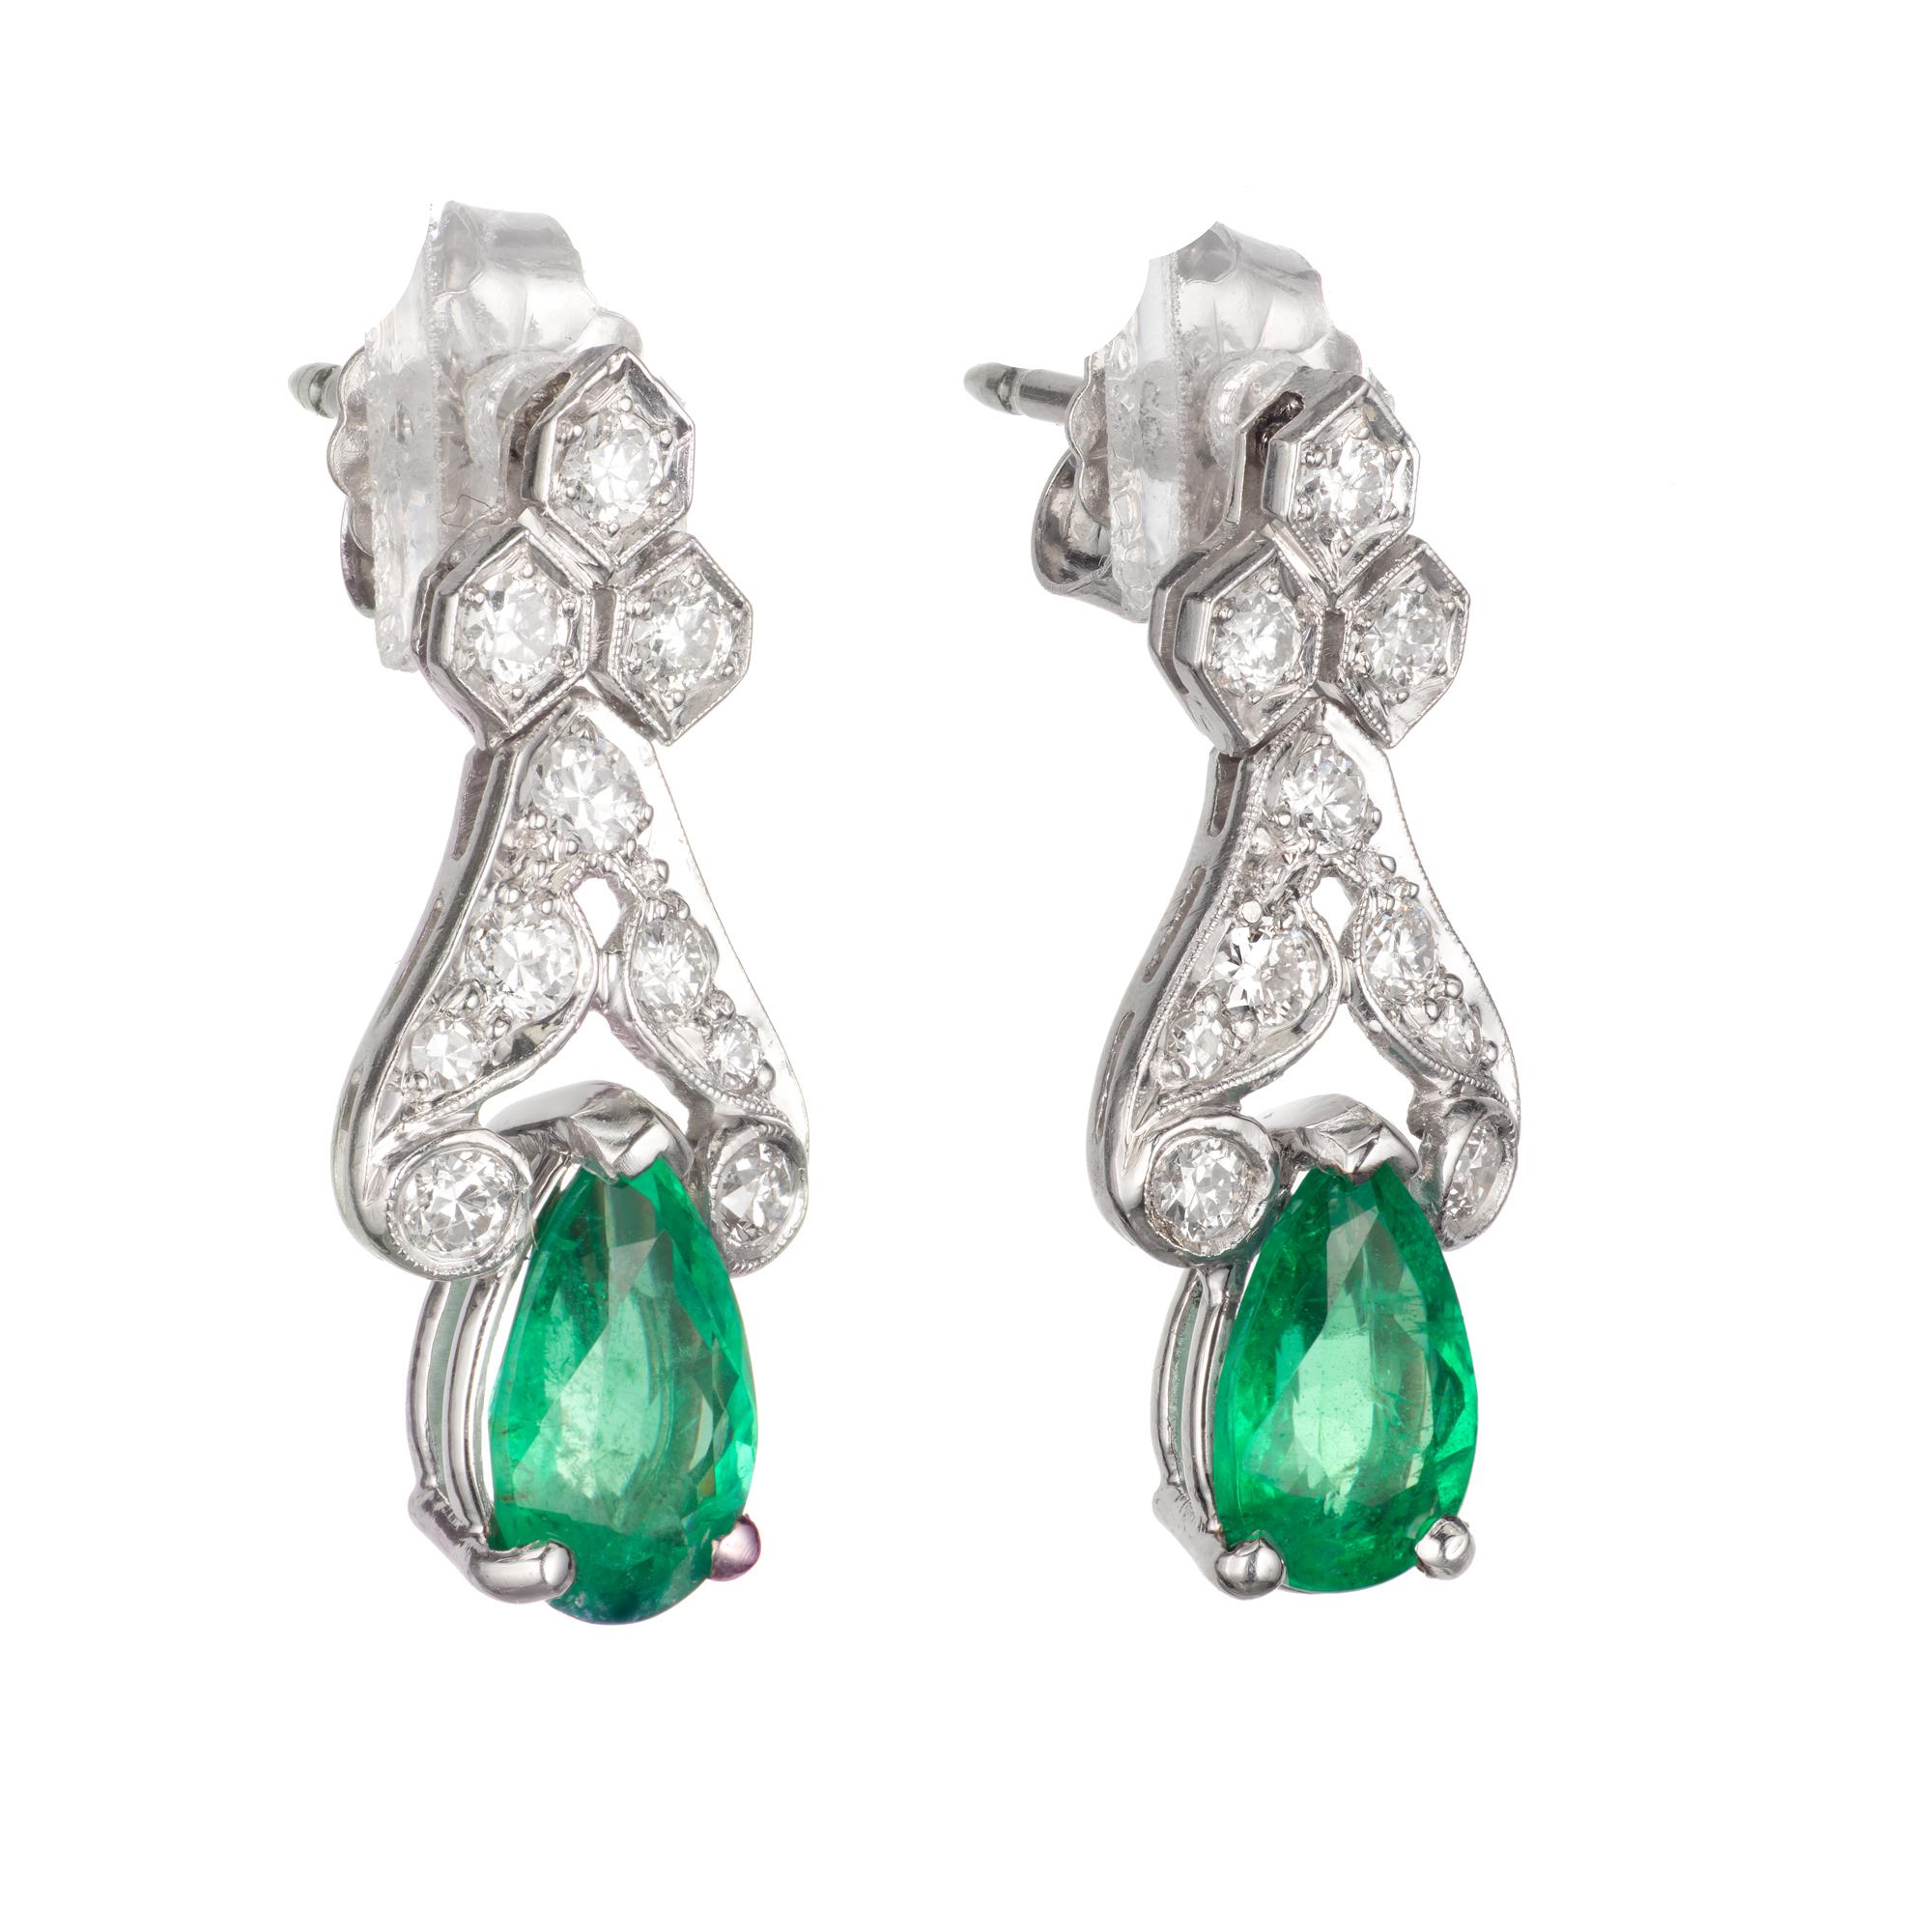 1940's pear shaped Emerald and Diamond Platinum Dangle Earrings. Pierced post style. Random tested GIA certified Emerald 0.81 carat natural color minor F1 clarity enhancement only.  

2 pear shaped green I Emeralds, Approximate 1.80 total carat